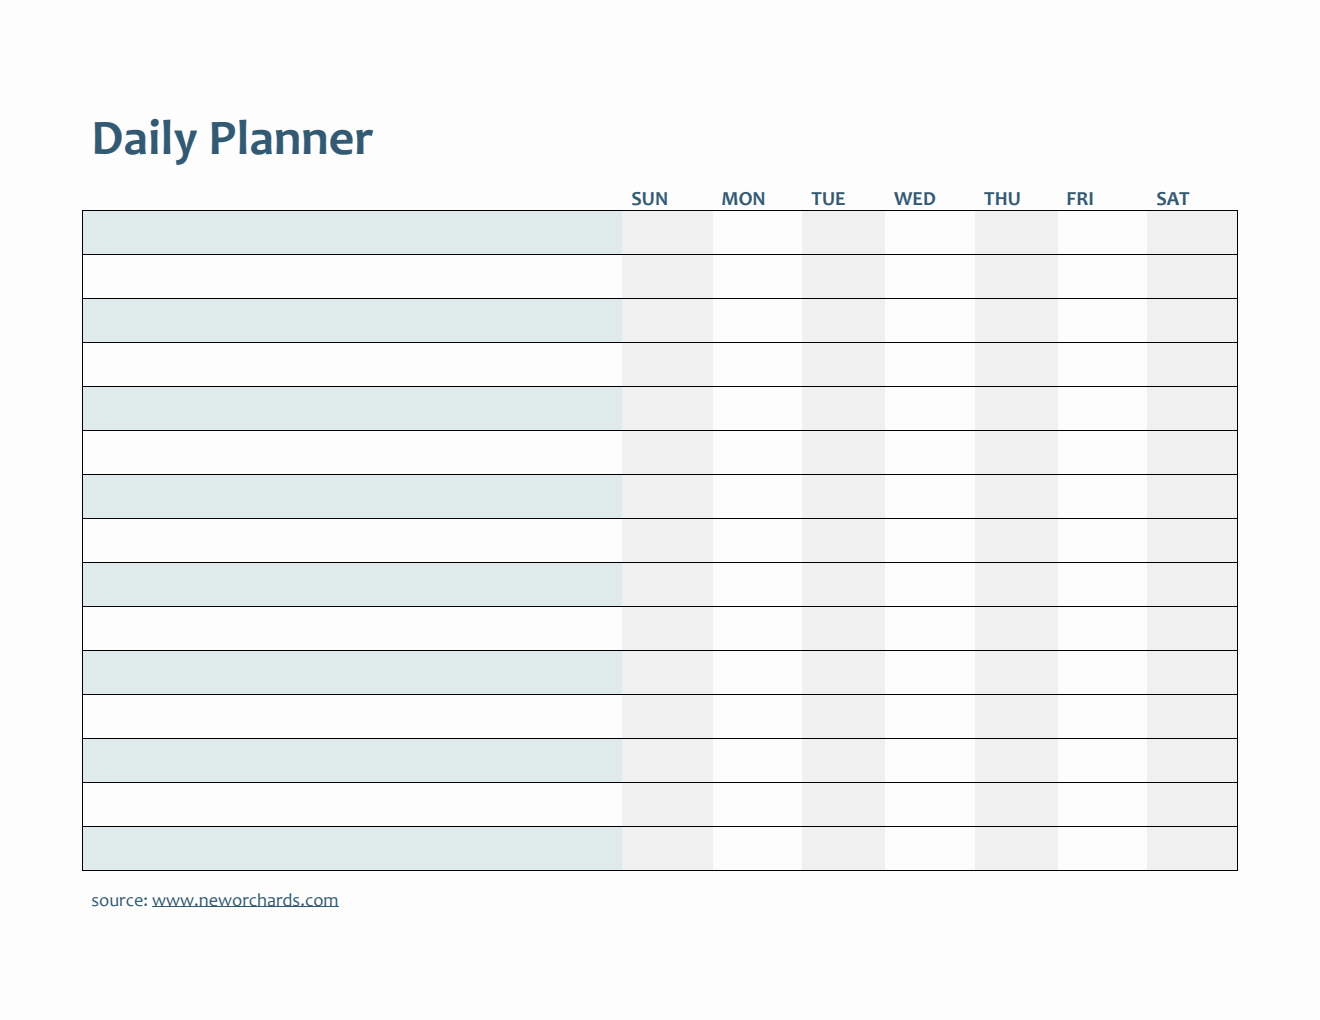 Daily Planner Template Customizable in Word